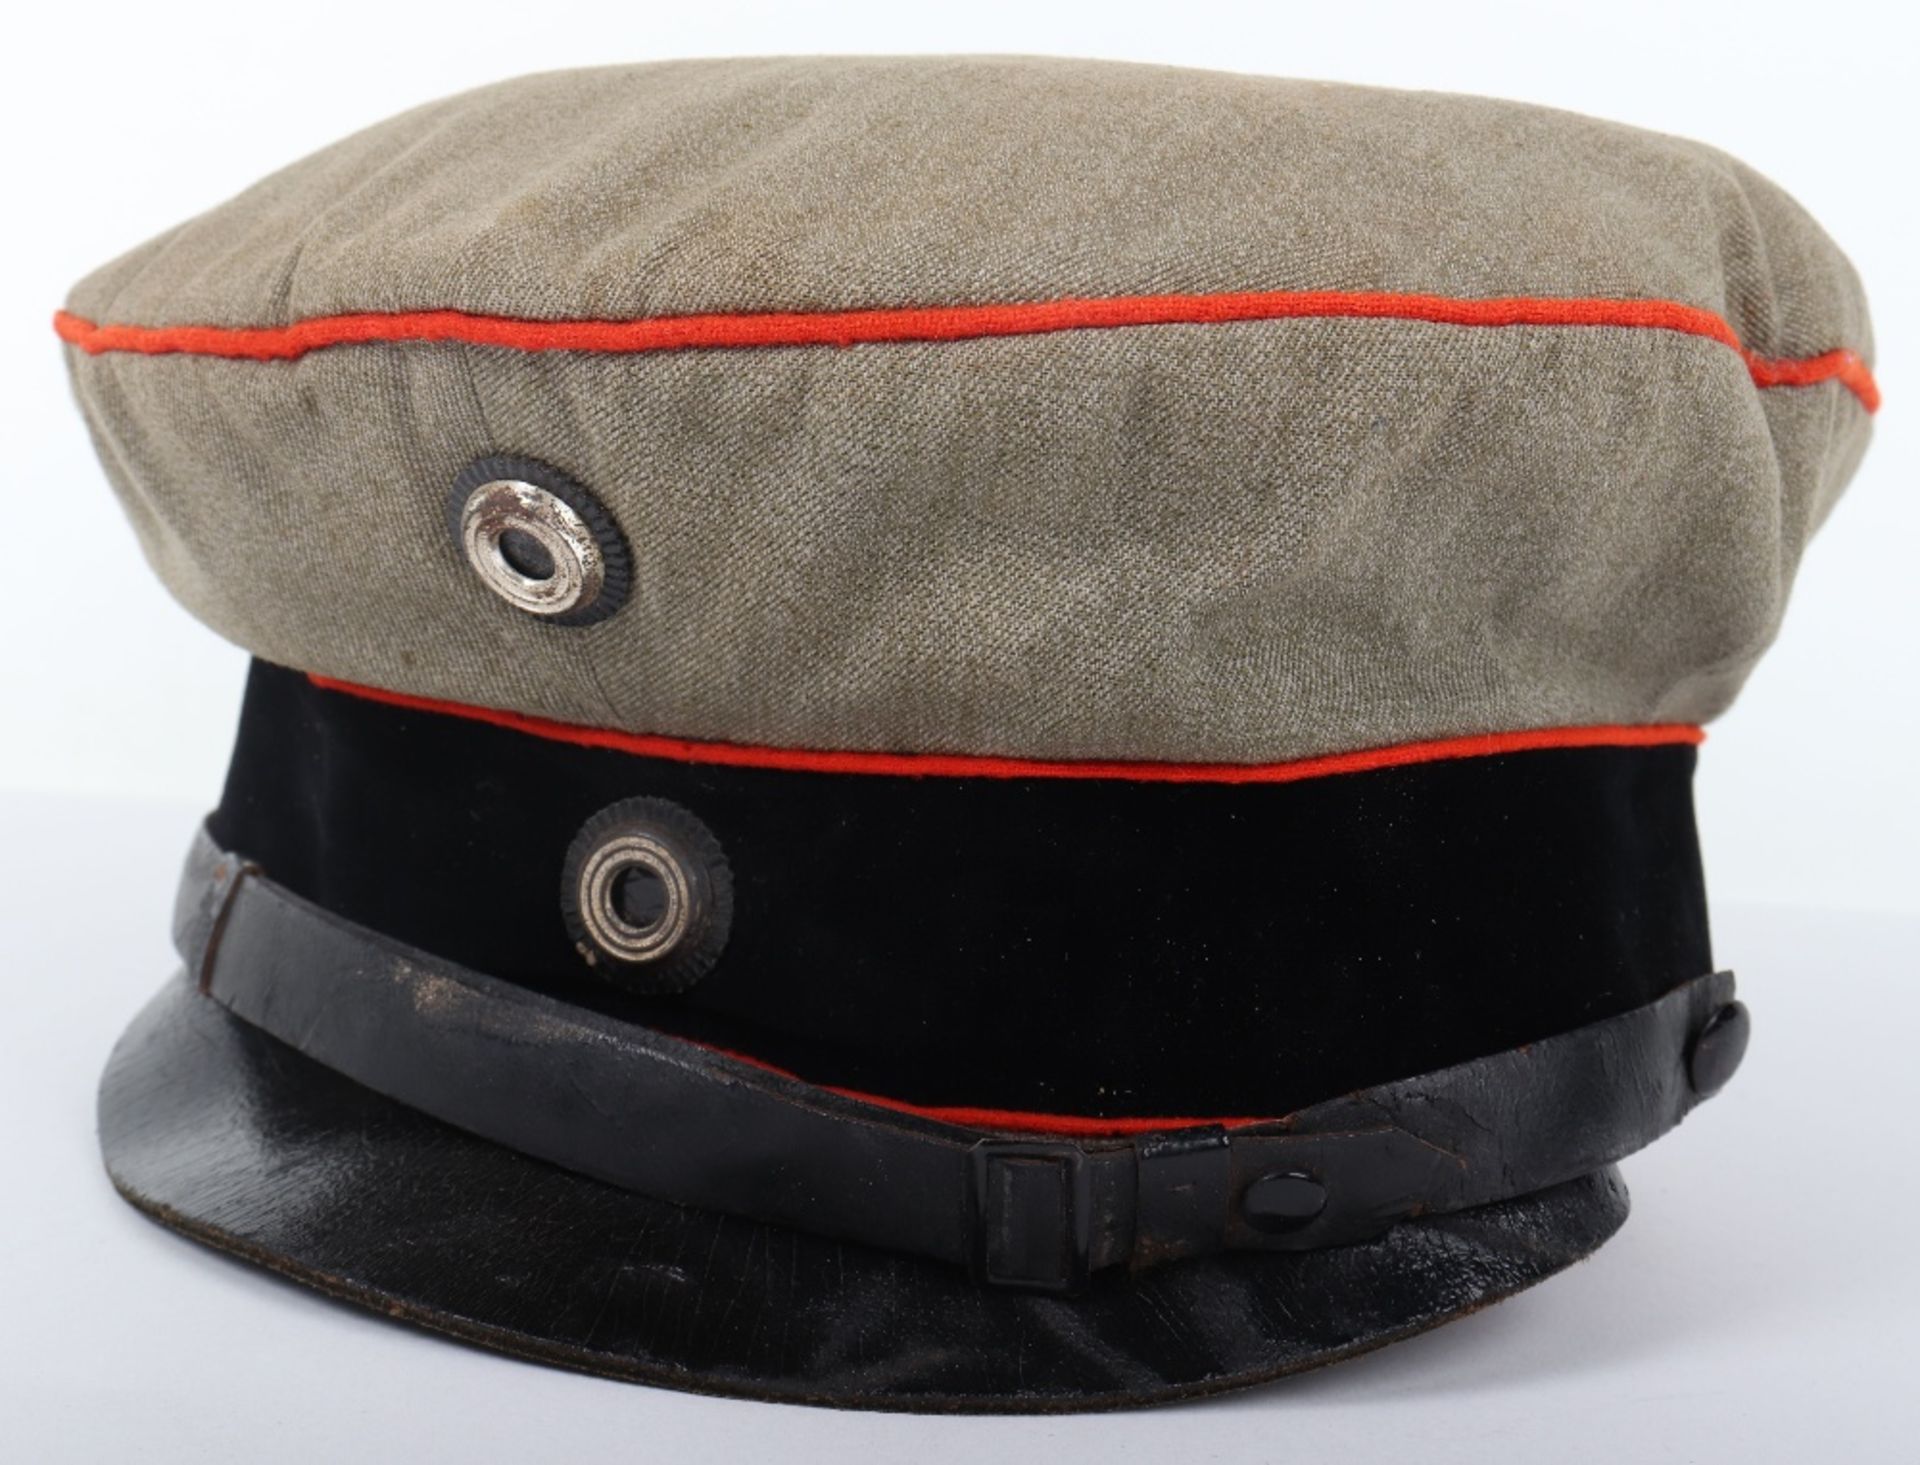 WW1 German M-1910 Officers Field Cap for Aviation, Technical & Artillery Regiments - Image 4 of 11